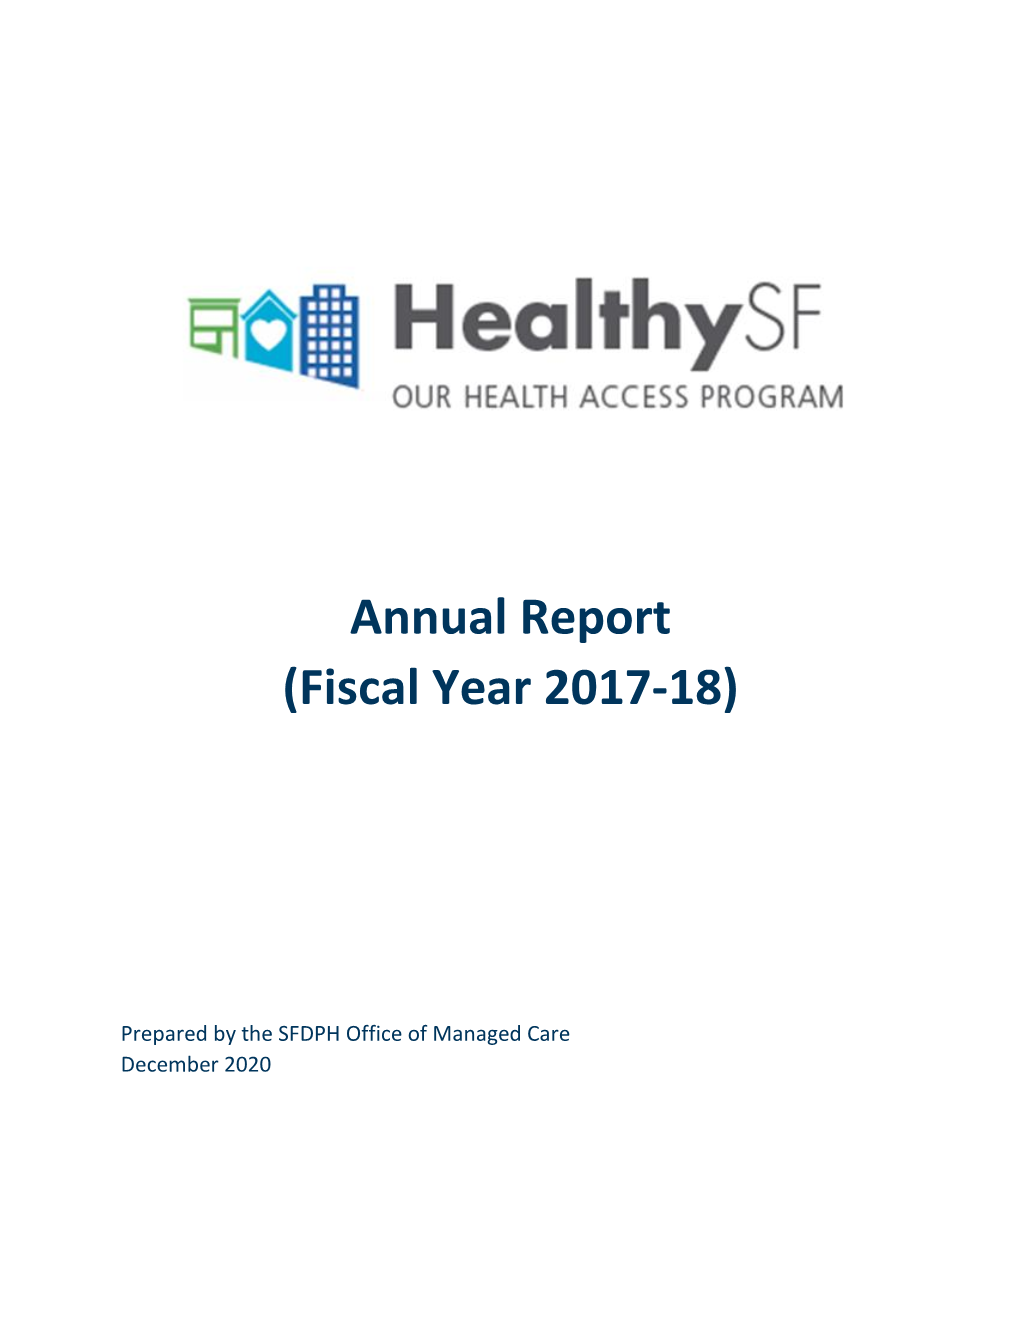 Annual Report (Fiscal Year 2017-18)